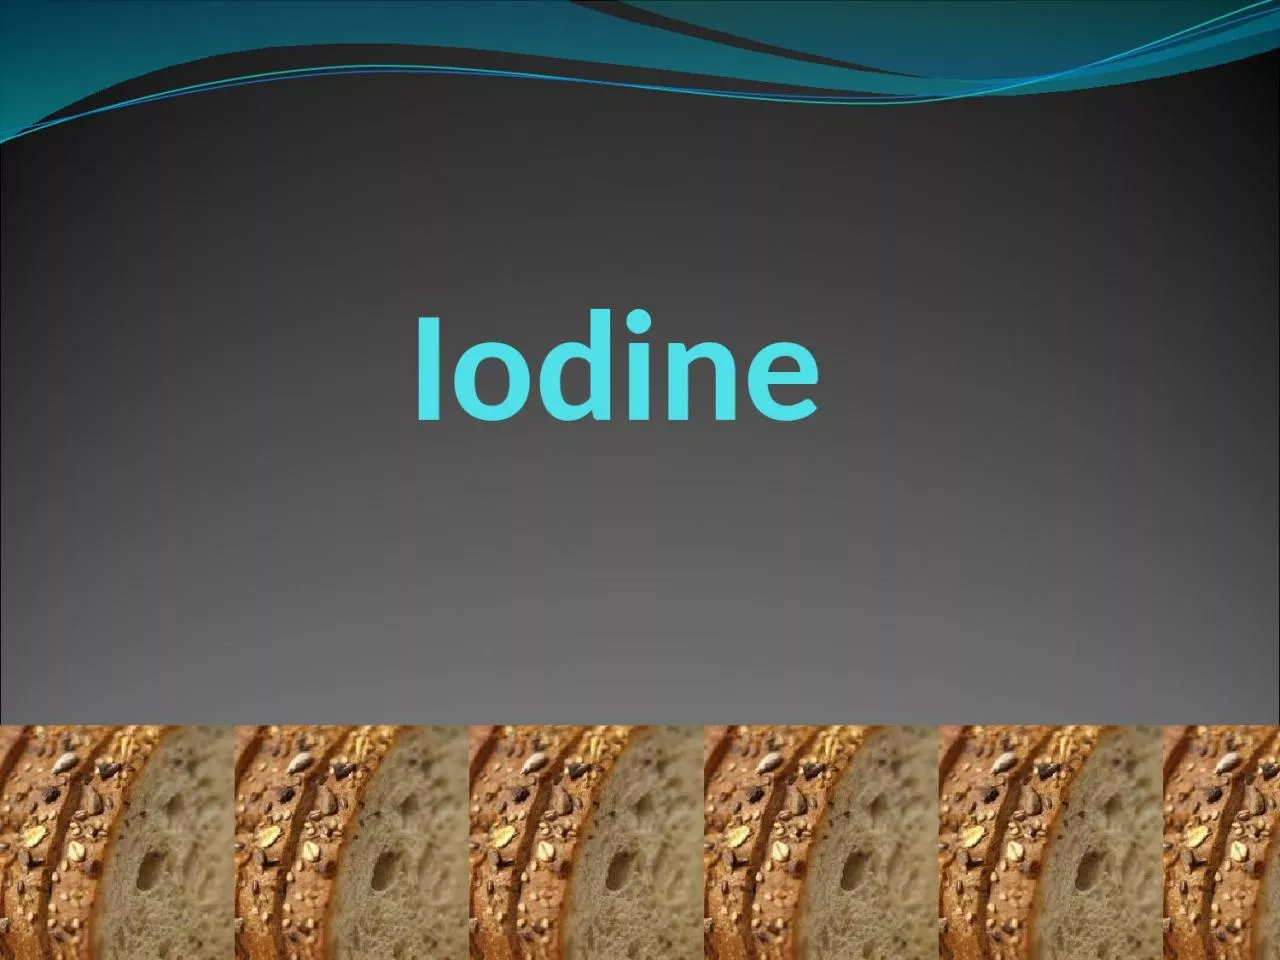 Iodine Goals Increase knowledge regarding the importance of iodine supplementation for